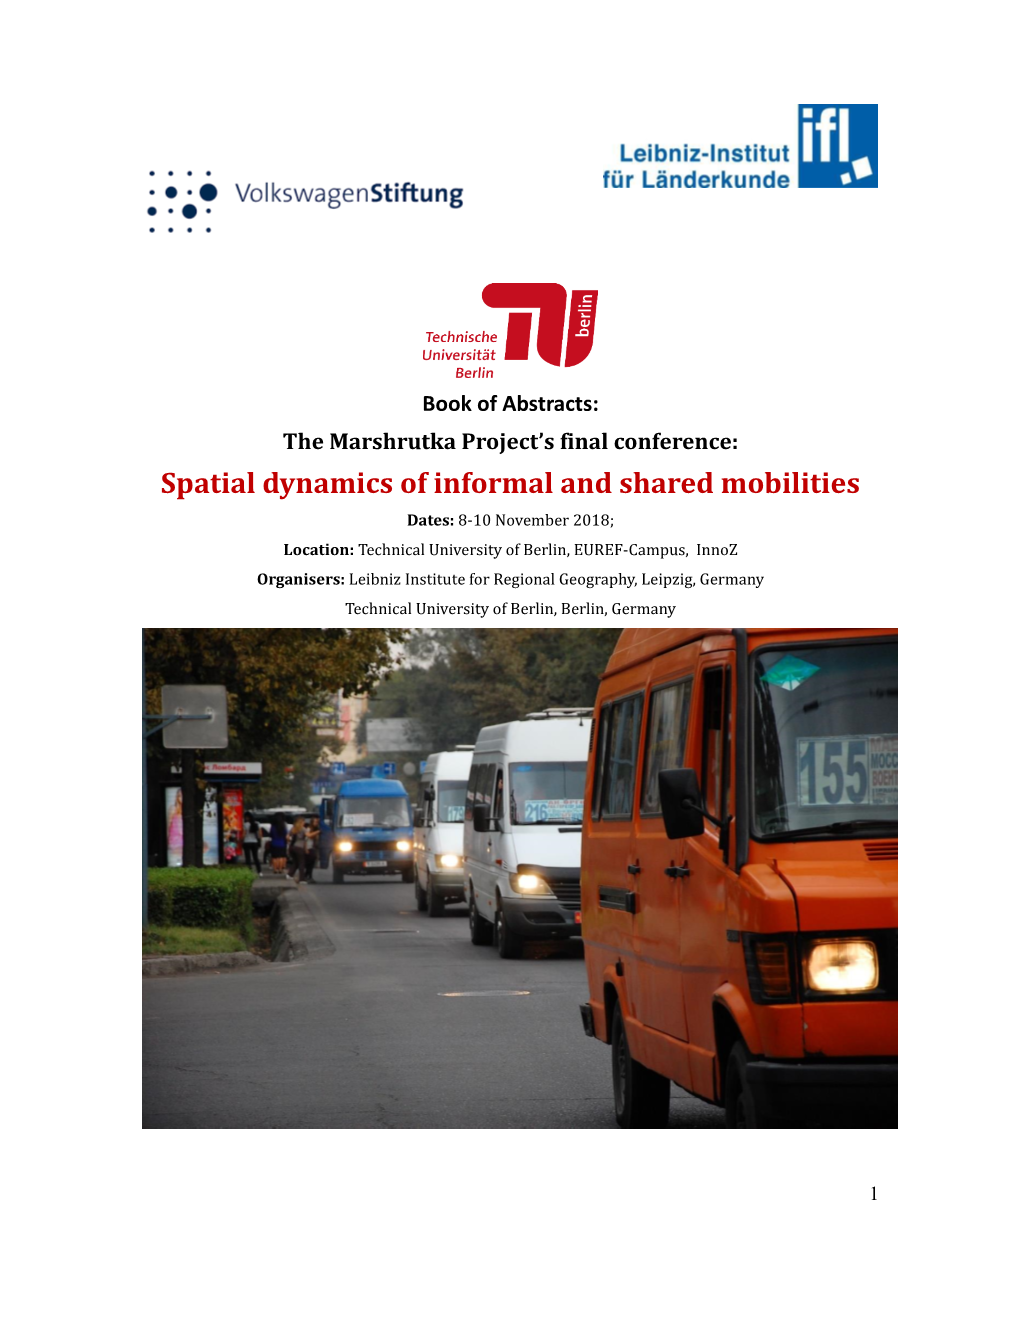 Spatial Dynamics of Informal and Shared Mobilities